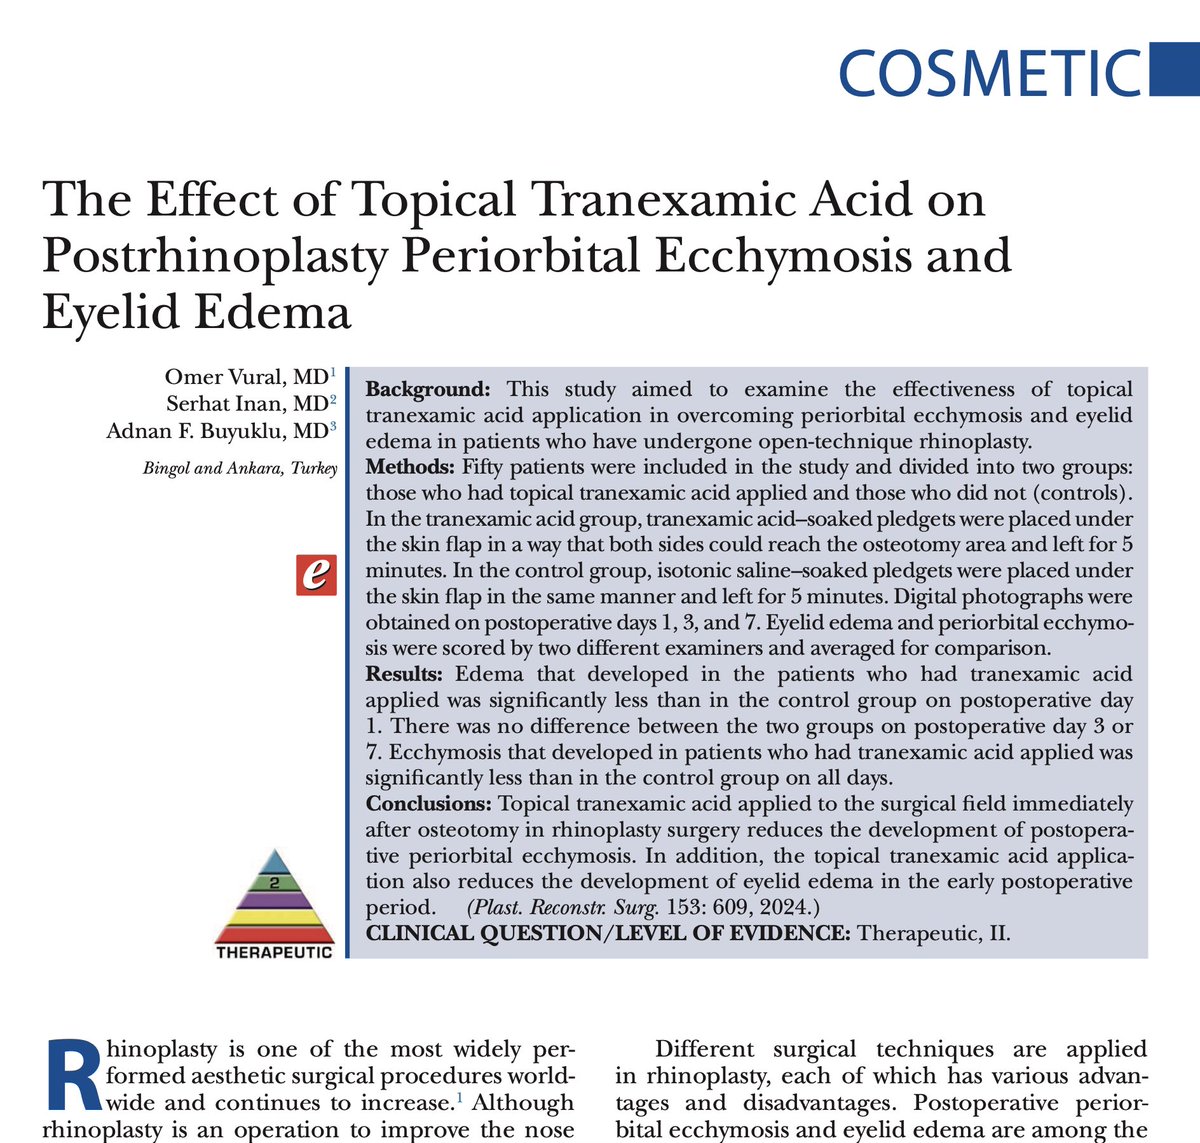 The effect of TXA has been studied extensively in plastic surgery. This is another excellent contribution of TXA in aesthetic surgery using a clinical trial design. PRS promotes scientific inquiries in aesthetic surgery through rigorous study designs. bit.ly/49Lxg5t